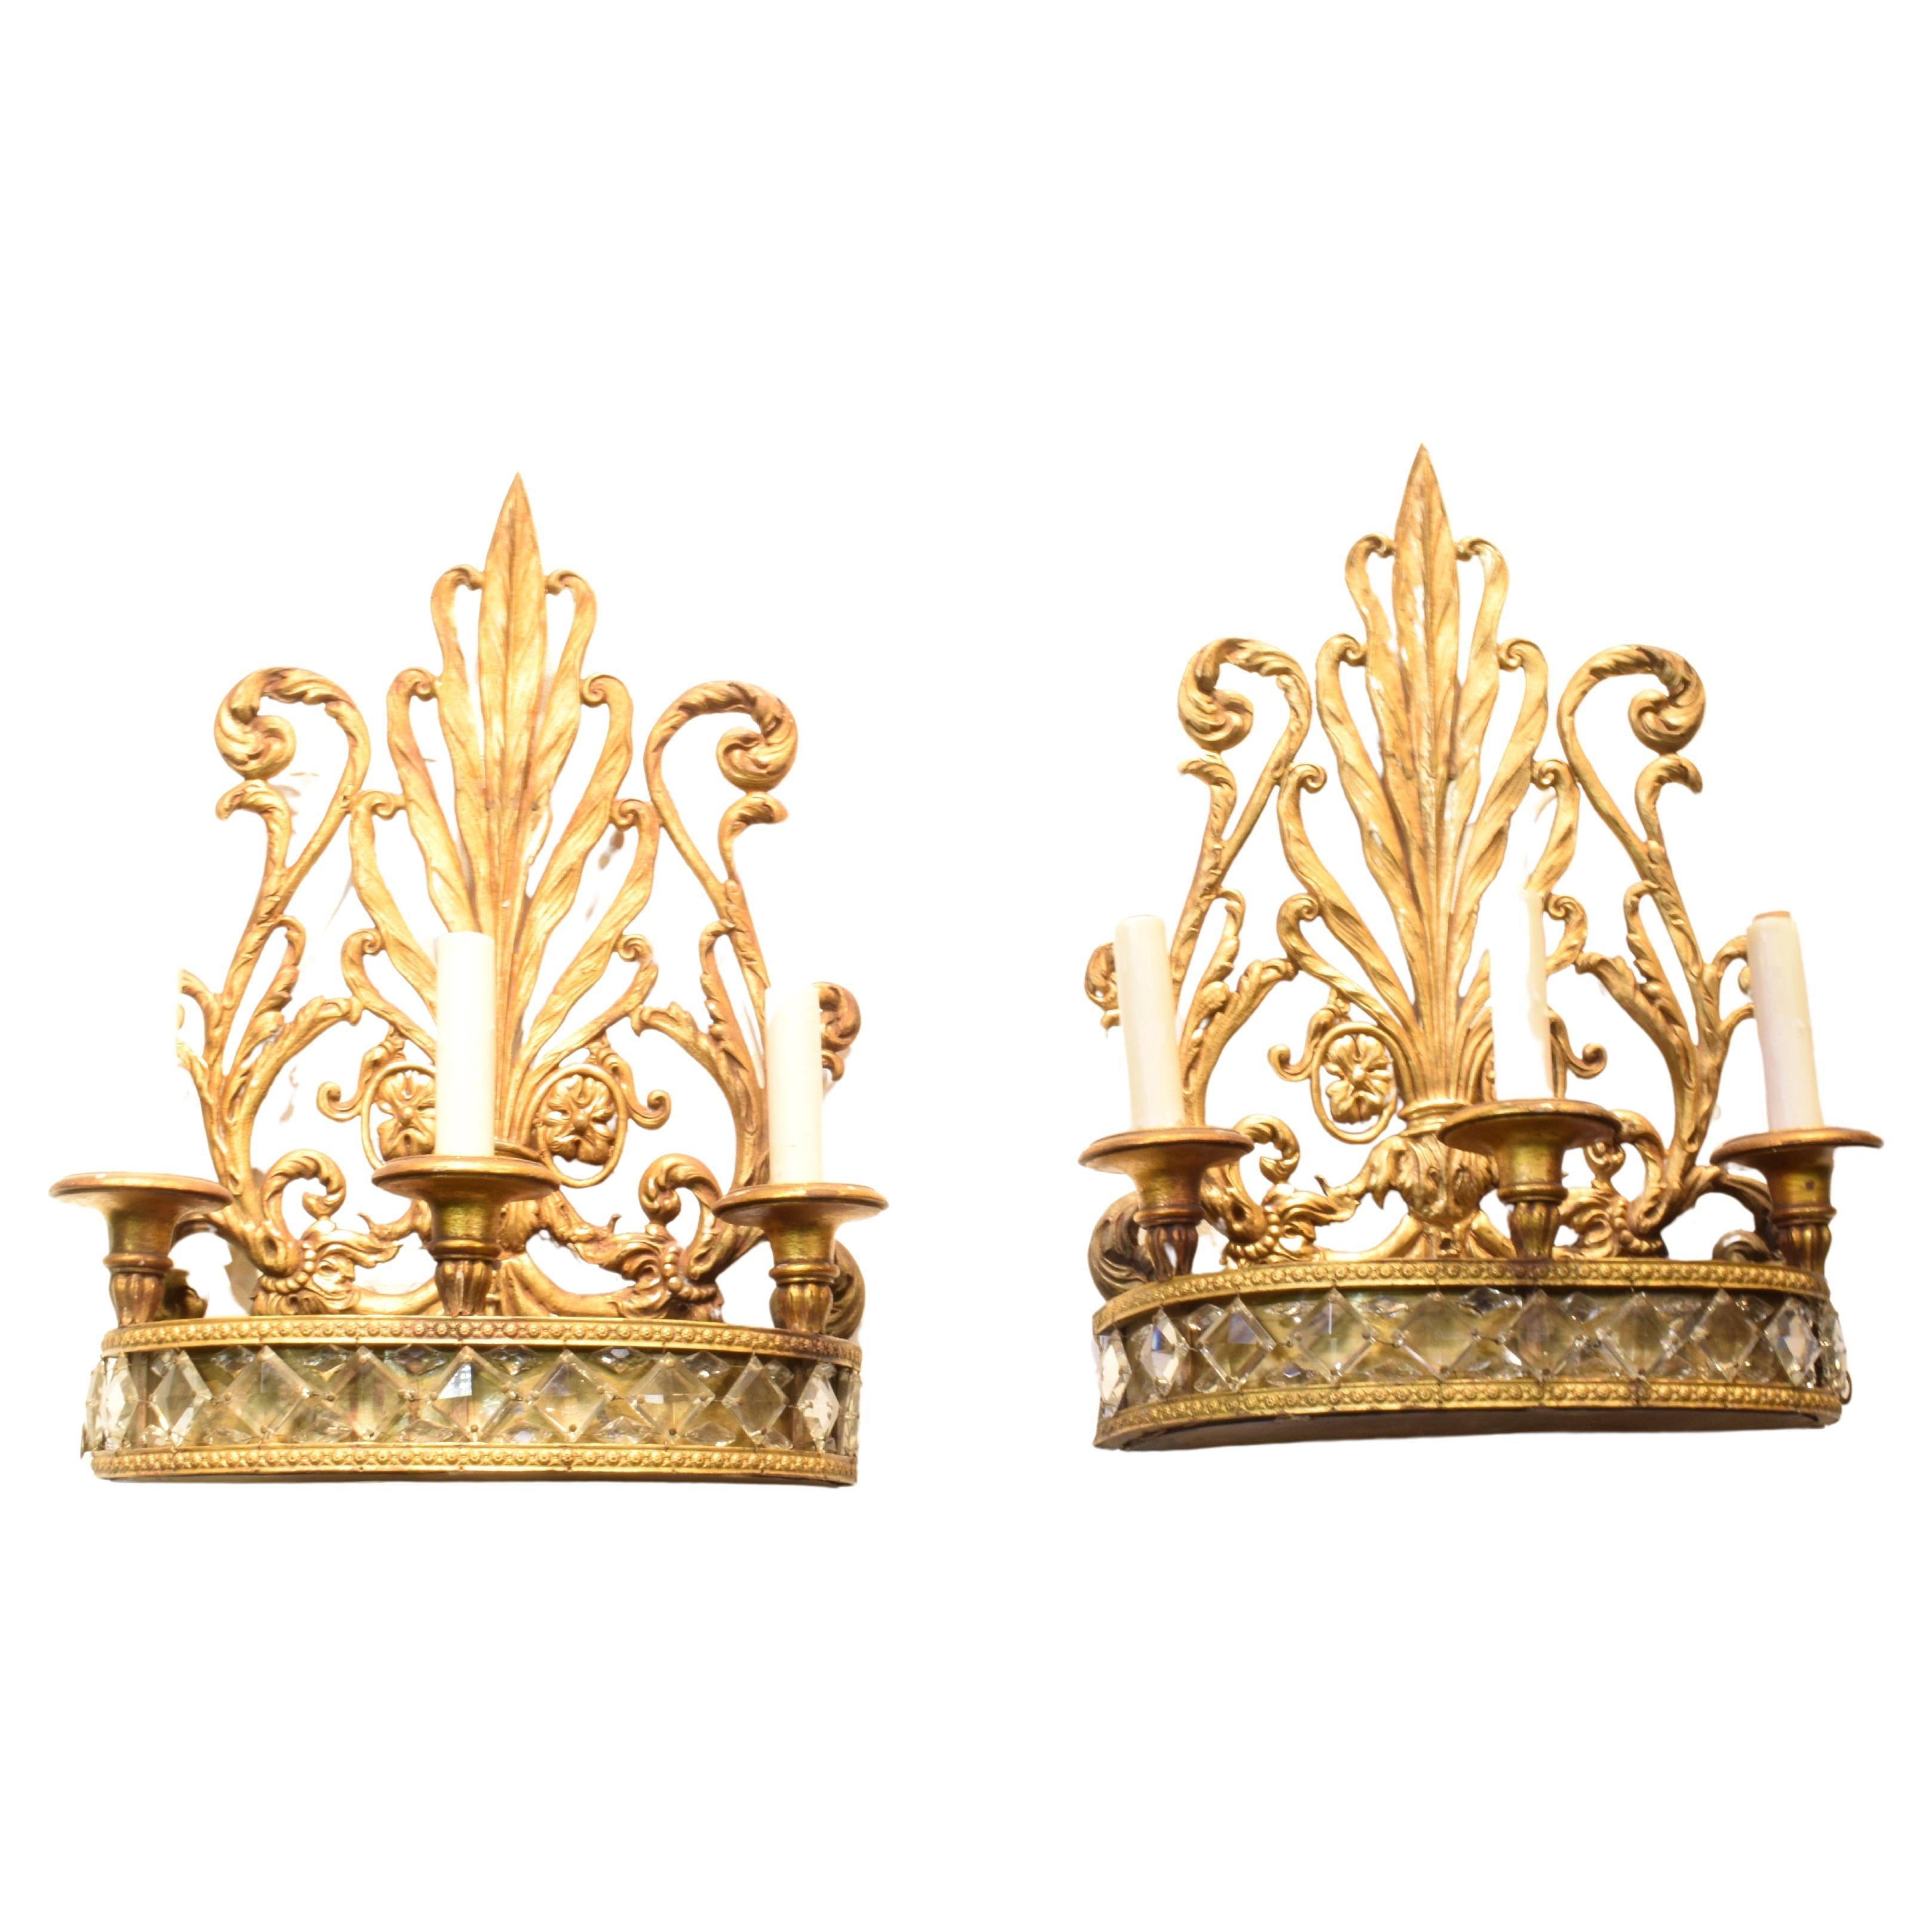 Pair of Wall Sconces attributed to Caldwell